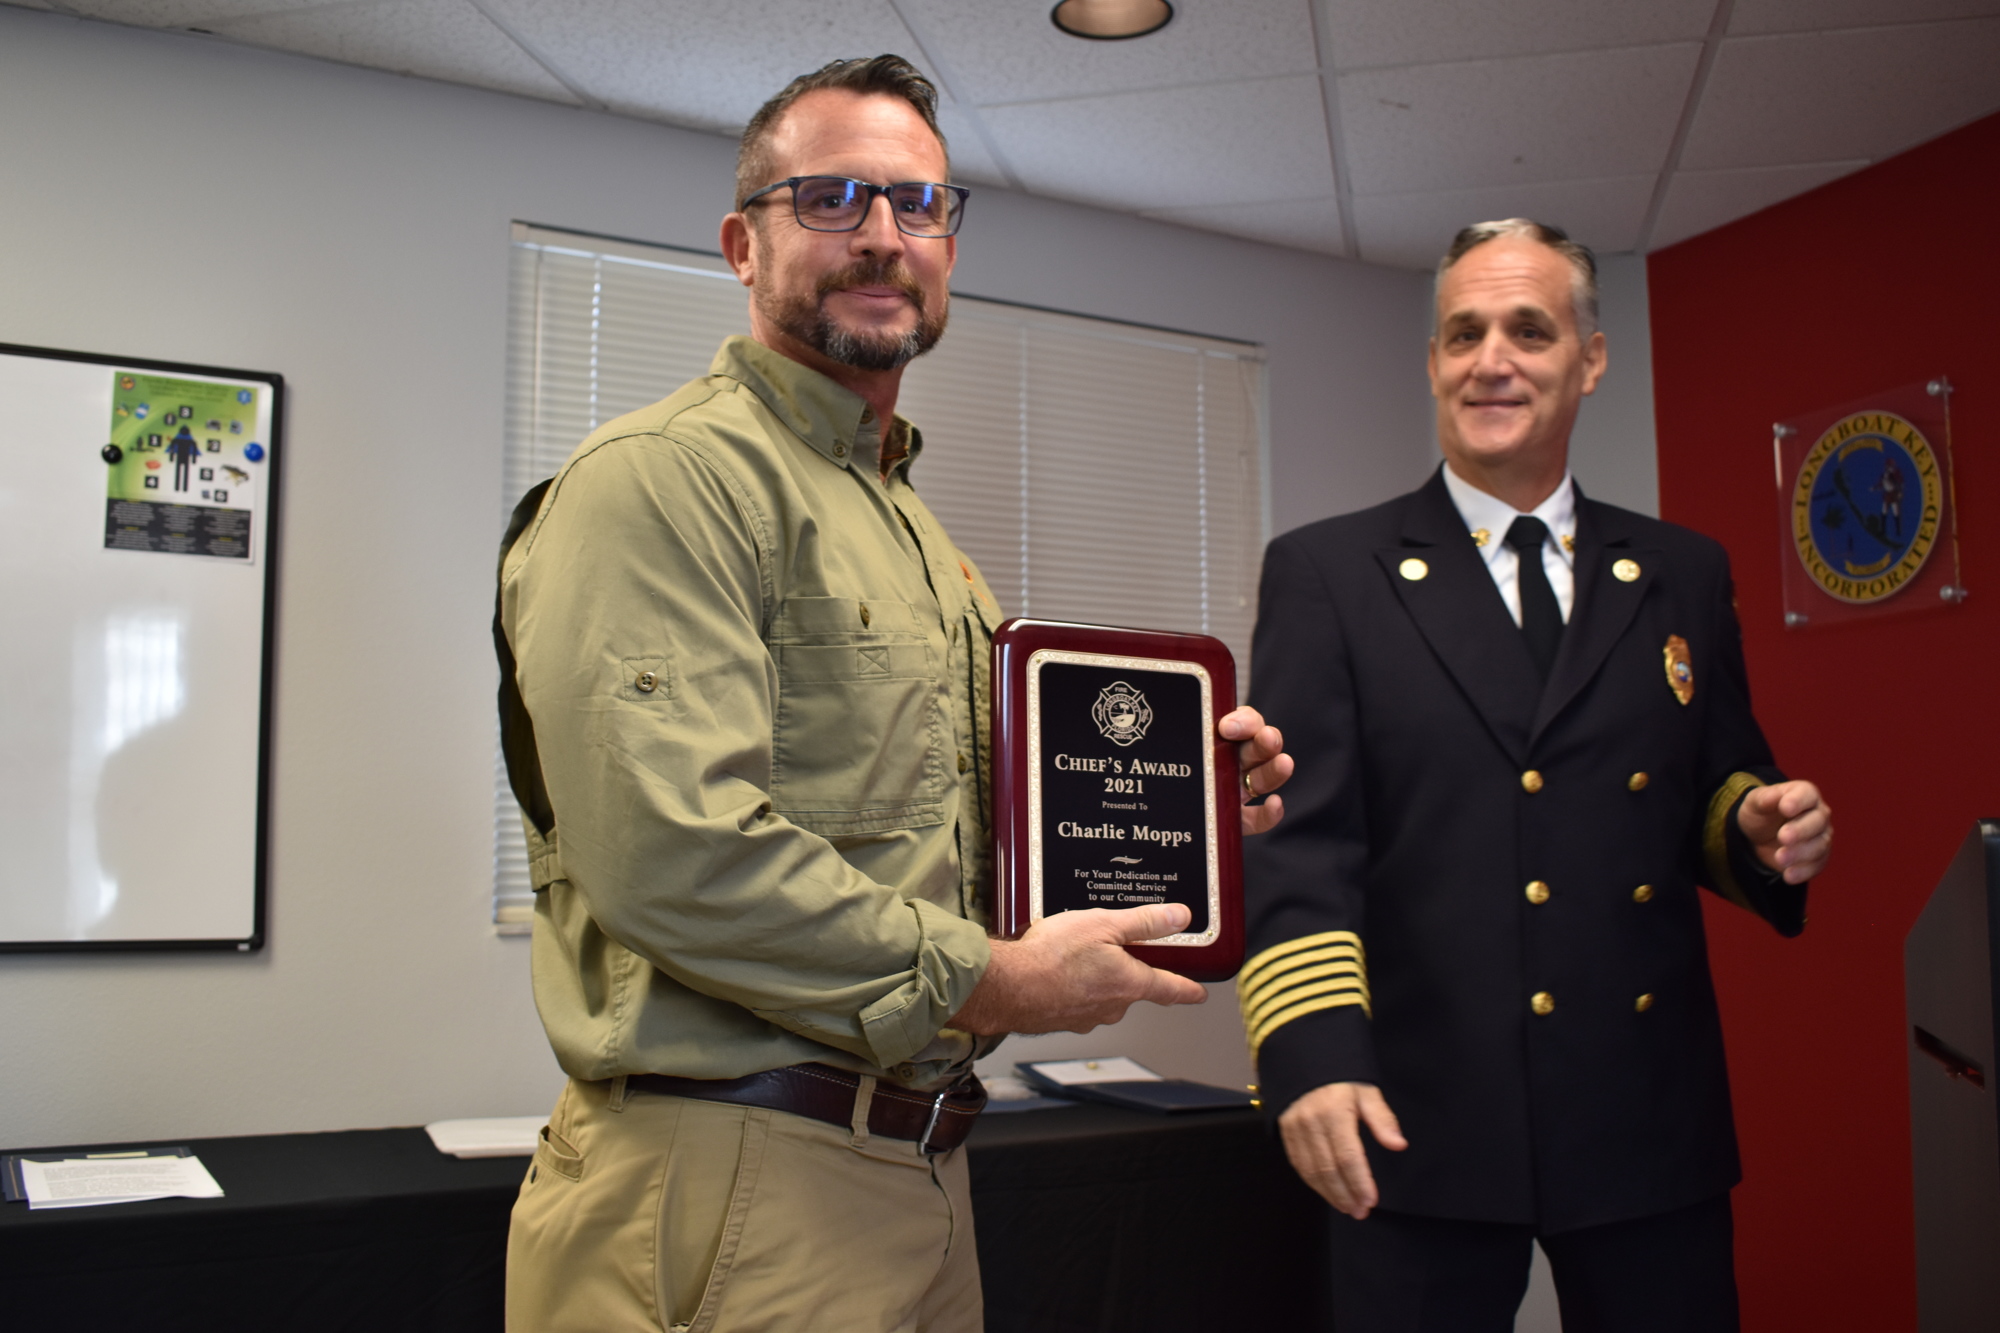 Fire Chief Paul Dezzi (right) recognized Charlie Mopps (left) in November 2021 with the Chief’s Award. (File photo)